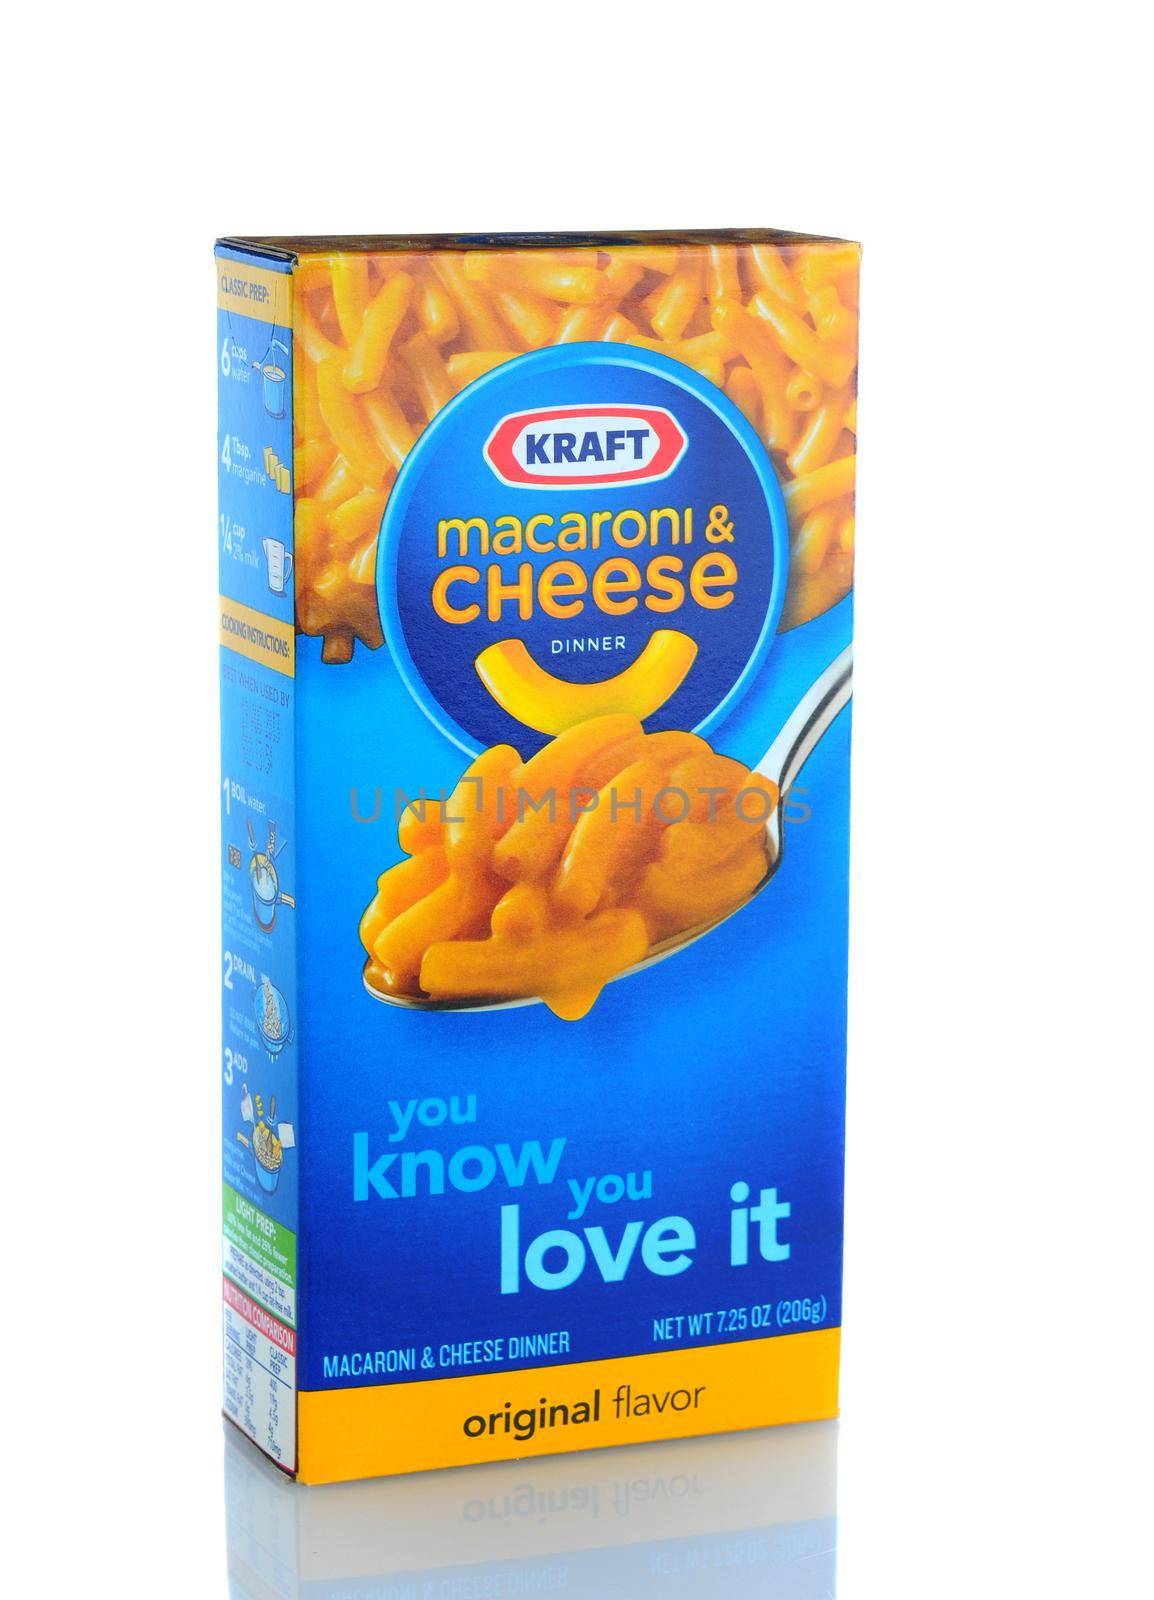 IRVINE, CA - January 11, 2013: A box of Kraft Macaroni and Cheese.  The packaged meal was first introduced in 1937 during the Great Depression.